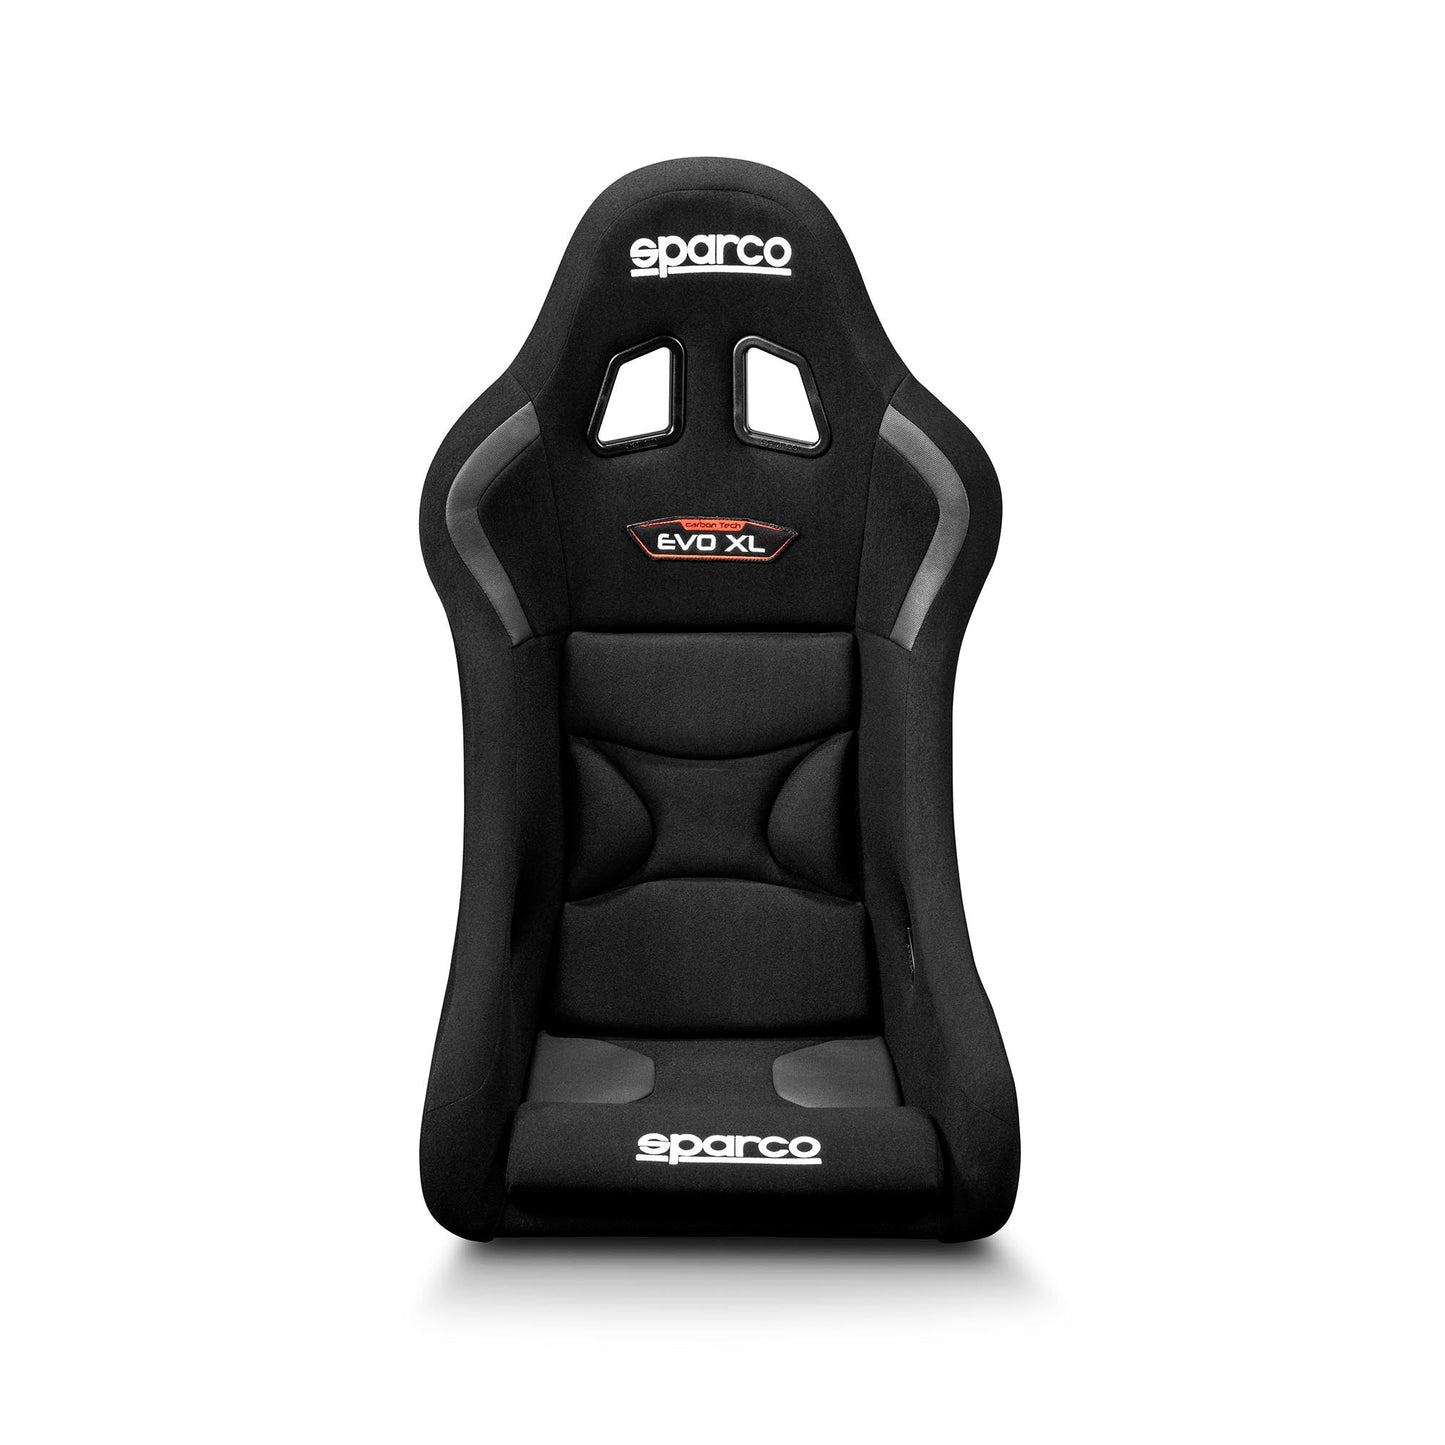 Sparco Evo XL Carbon Racing Seat